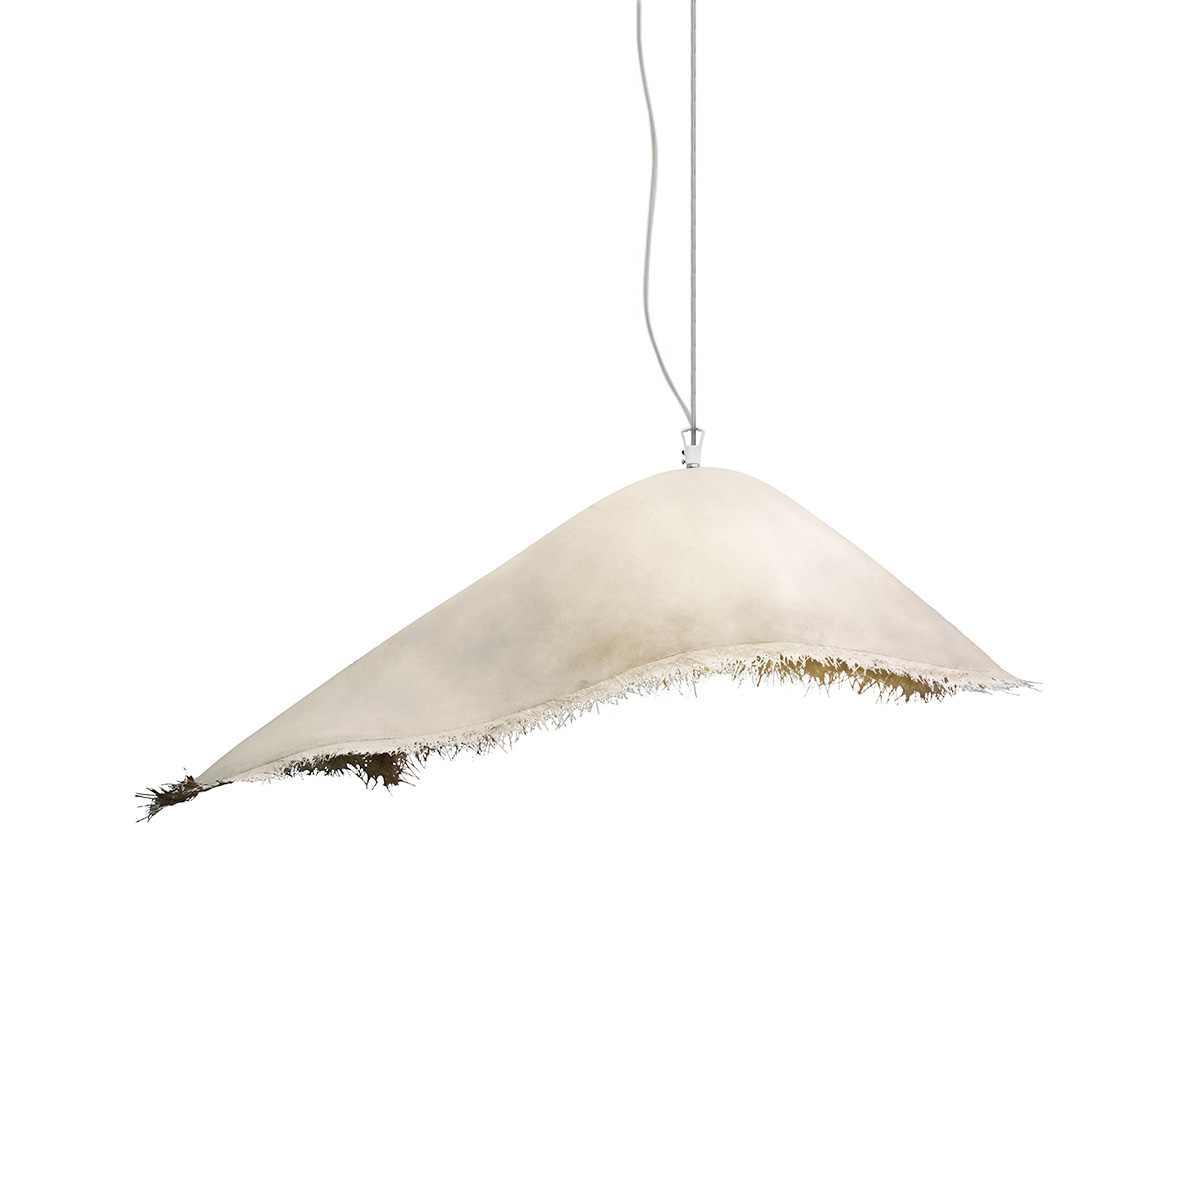 MOBY DICK suspension lamp